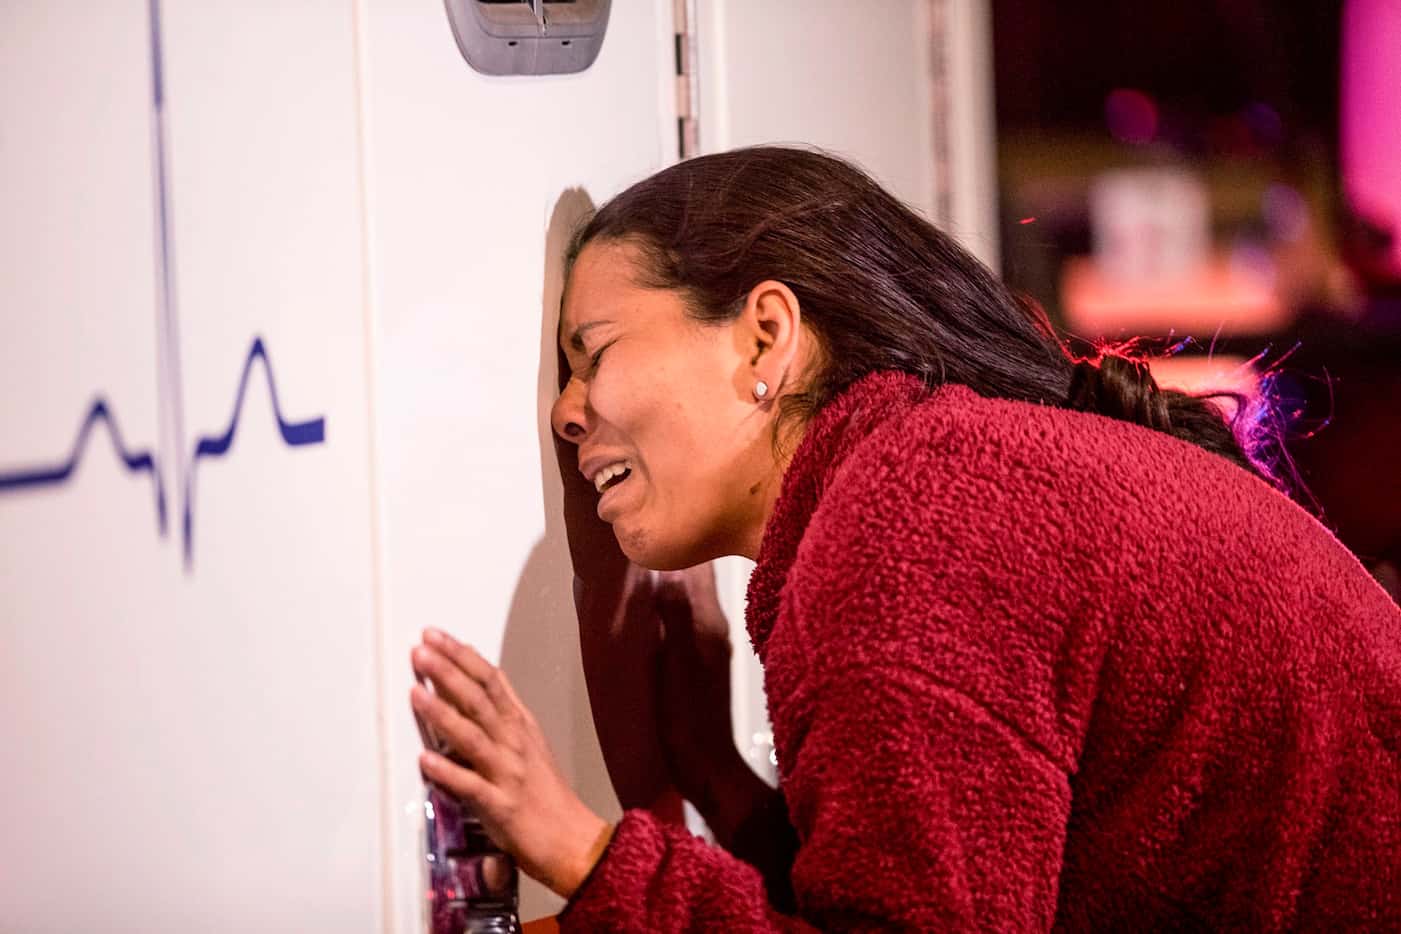 A migrant cries leaning on an ambulance as a person she knows is attended by medics after a...